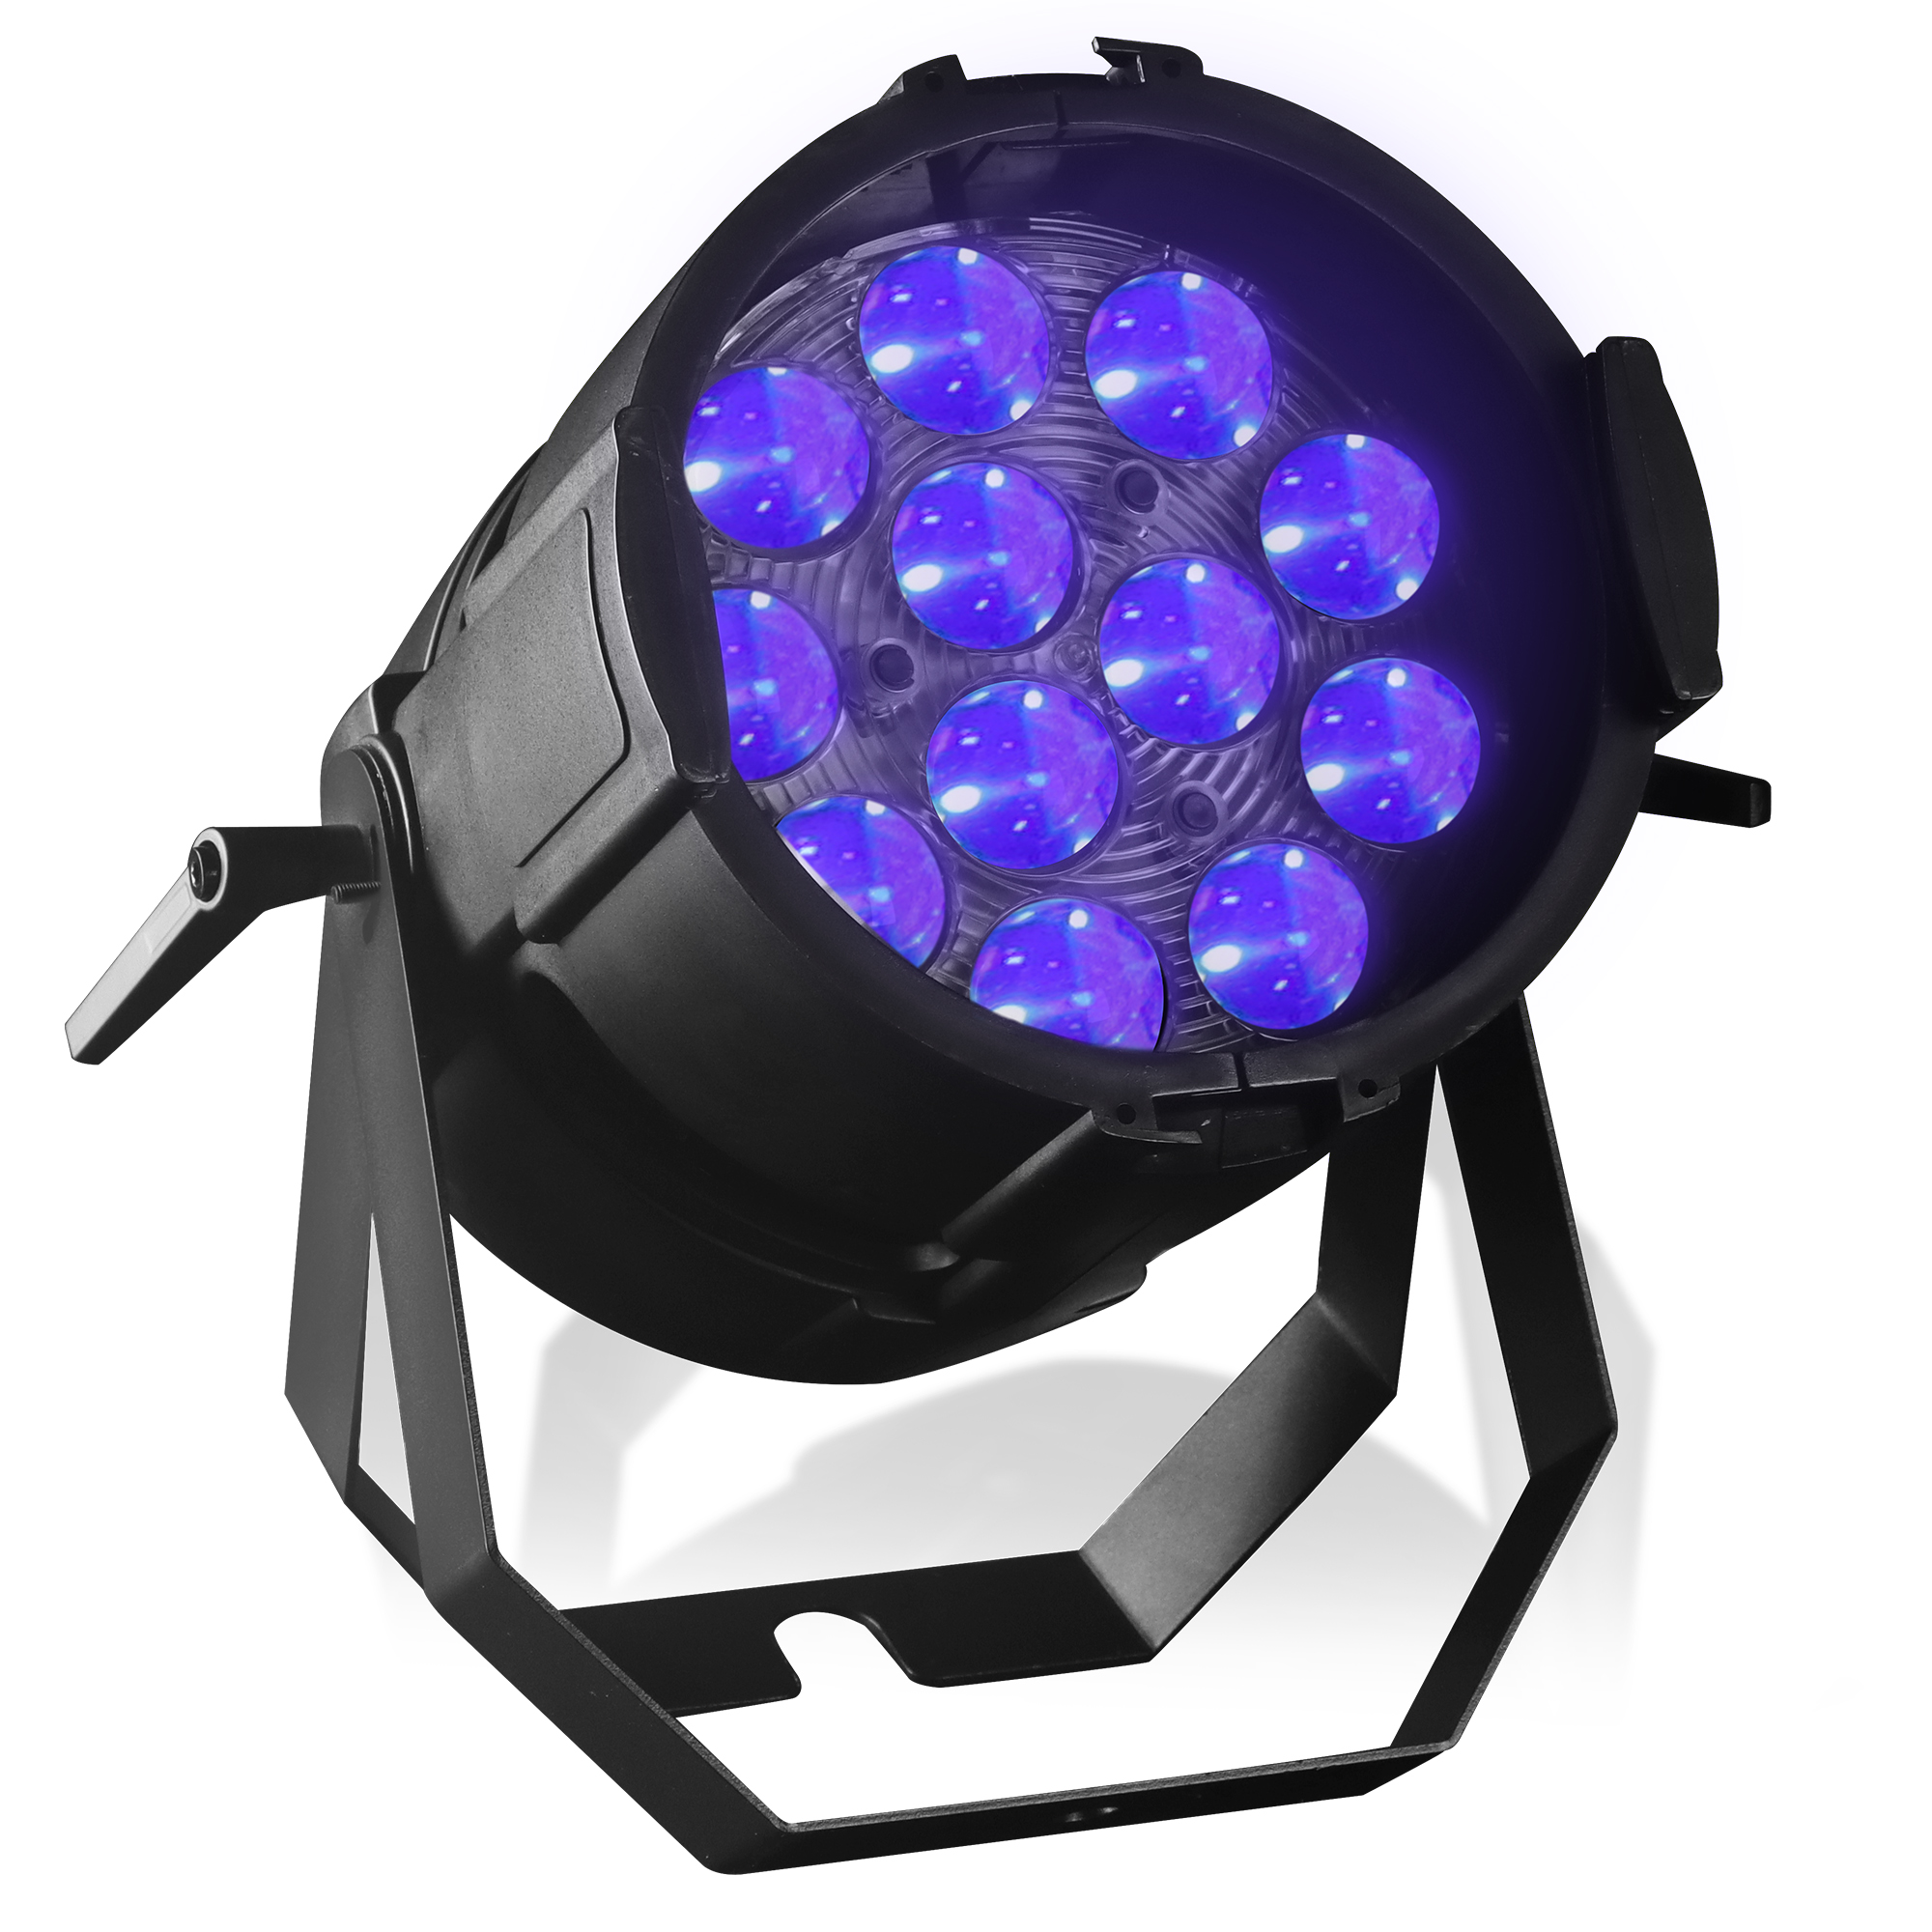 stage lighting led Par Light RGBW 4-in-1 12*10w and 12*20w parcan light